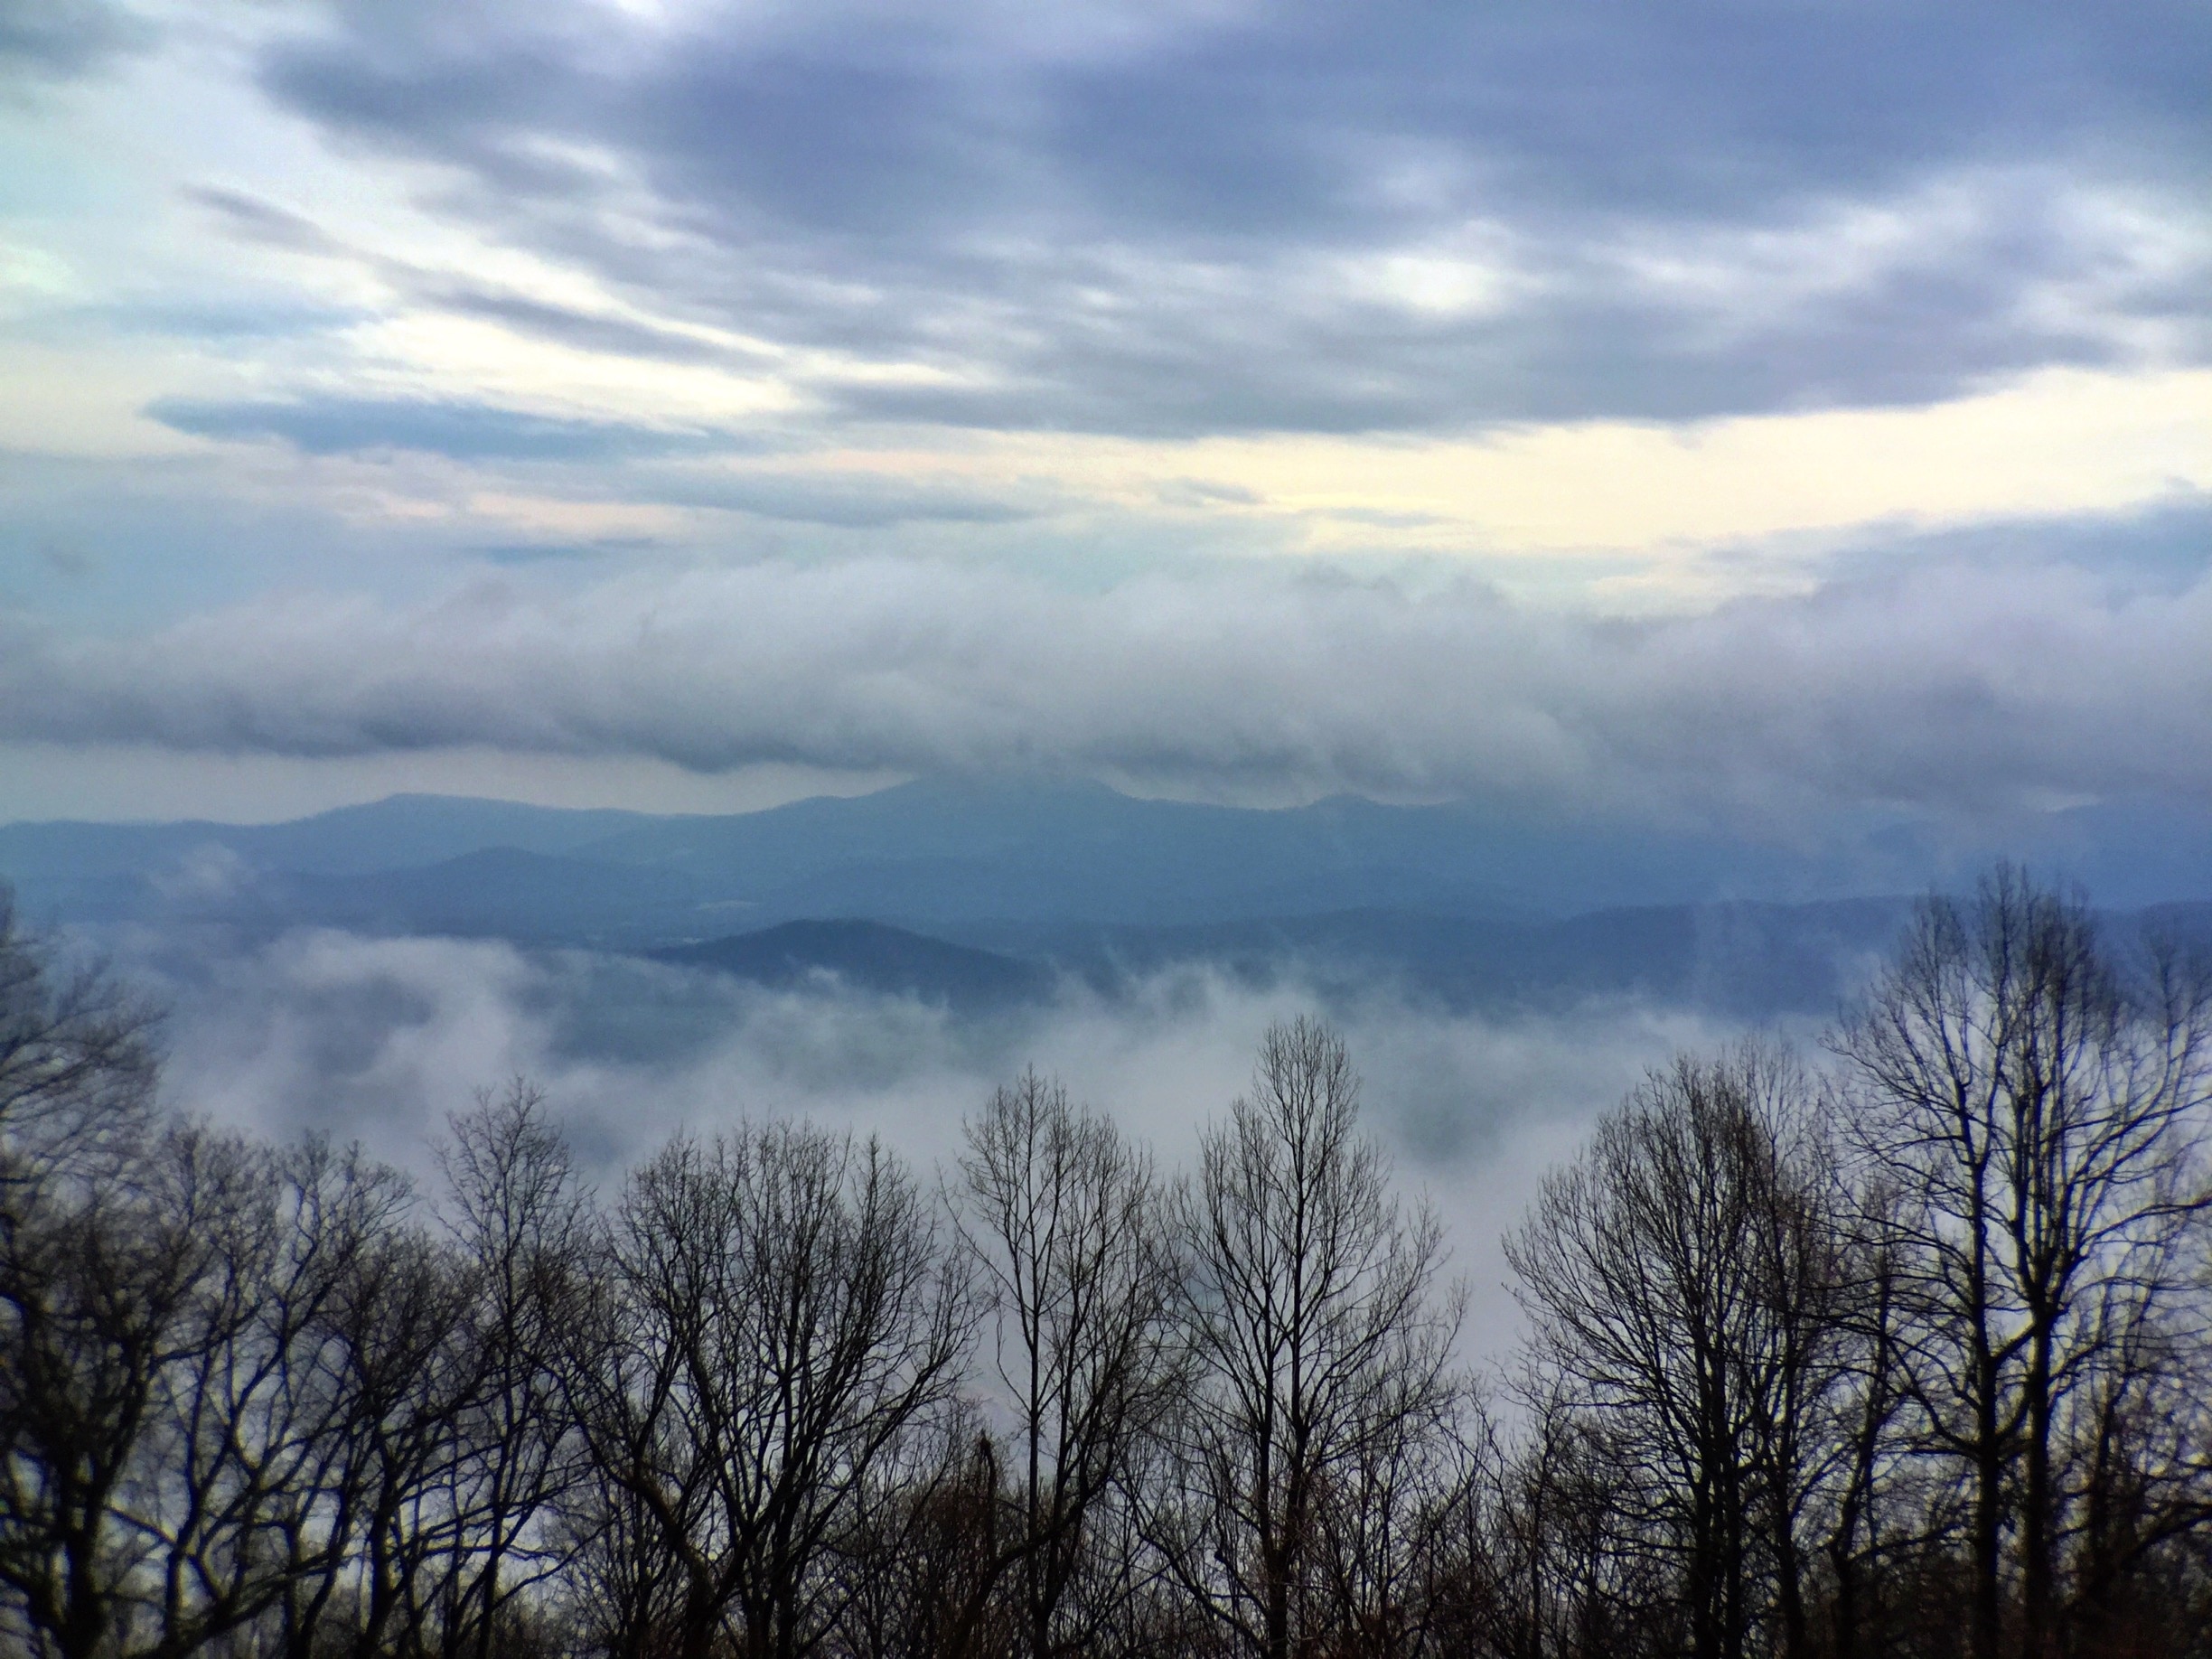 On a recent one-day #roadtrip to the Blue Ridge Parkway in Virginia, I found myself both above and below the clouds! It was only my second time out here, but I'll be making sure to come more often this spring!